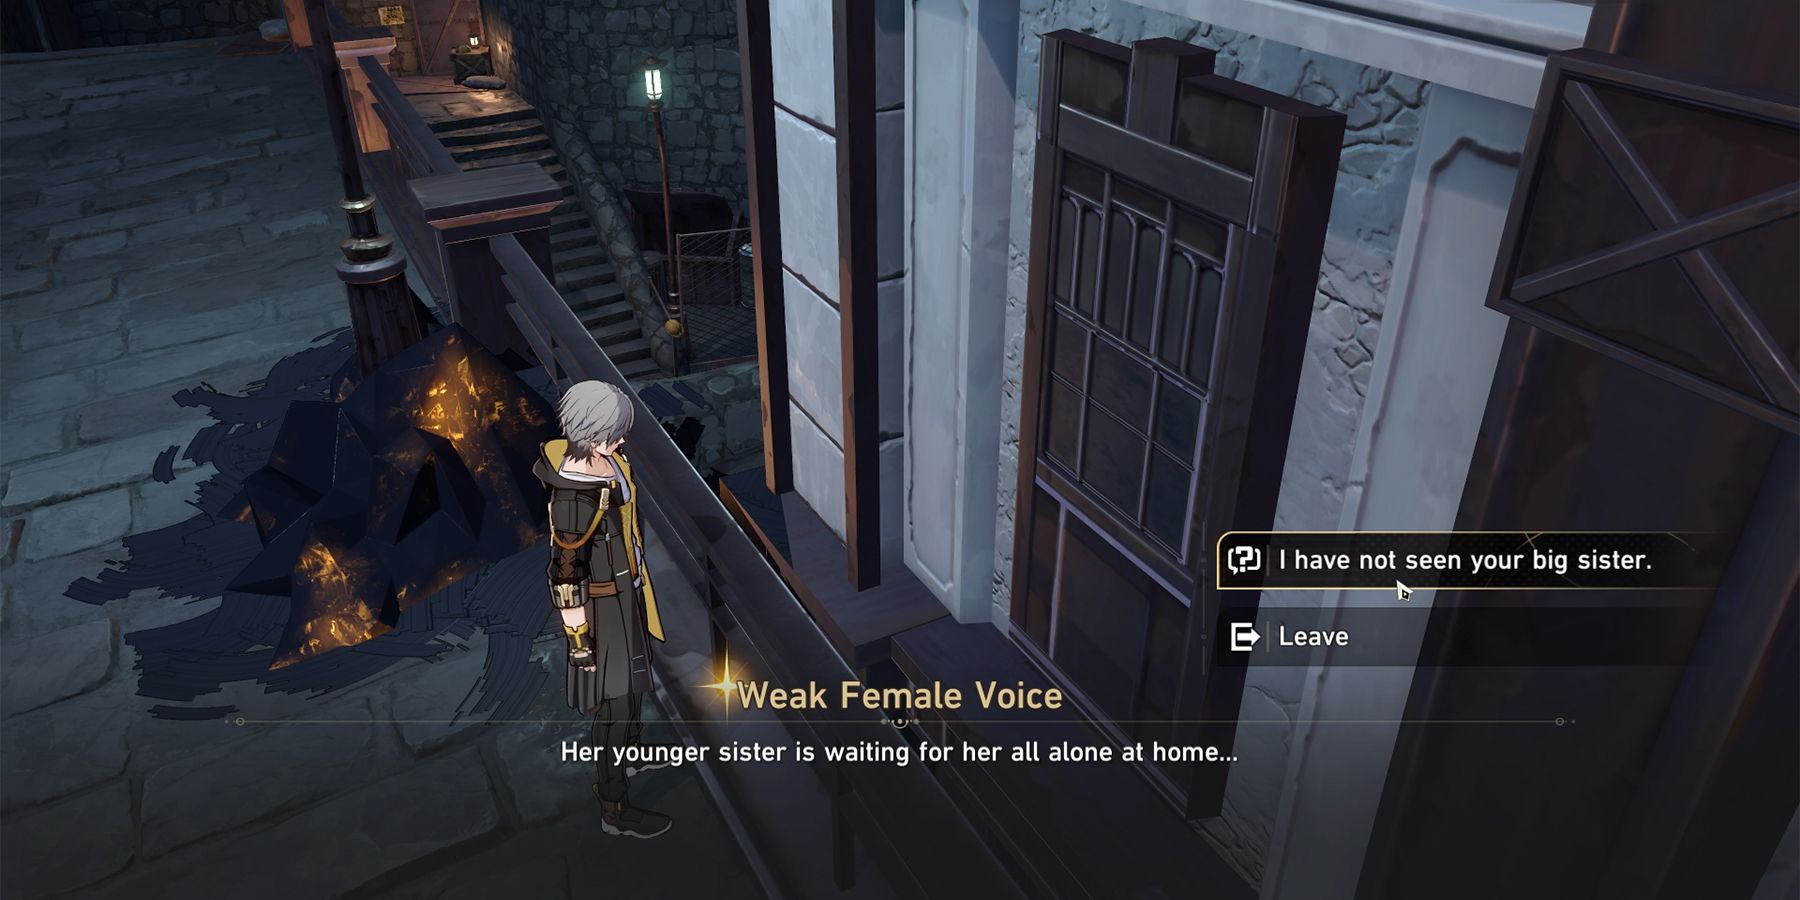 dialogue options with the female voice behind the window in honkai star rail